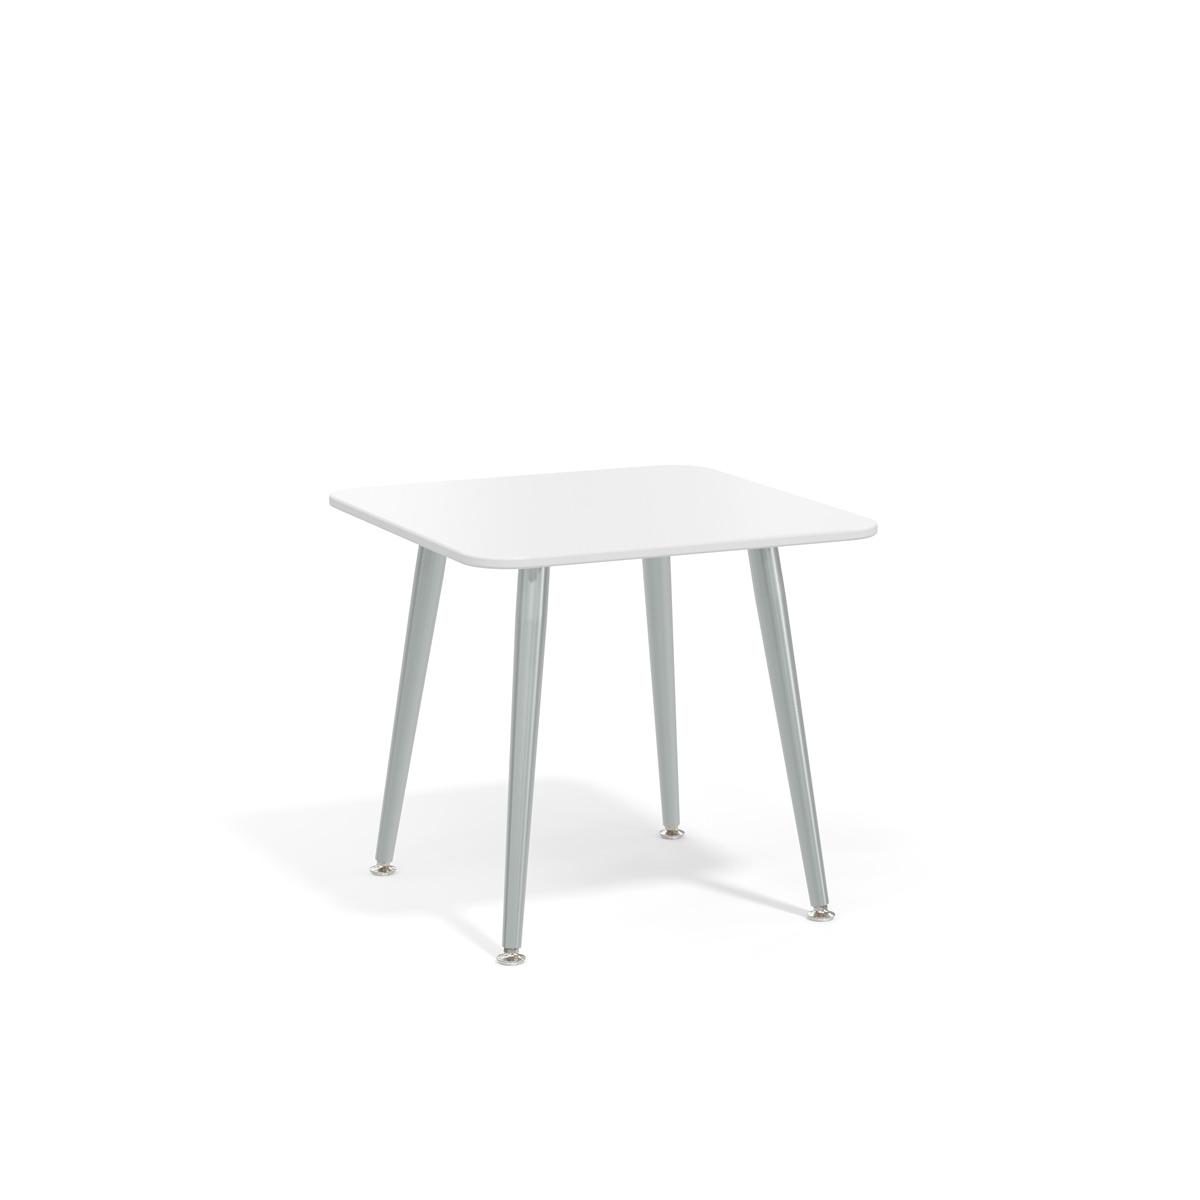 Freestanding Square Table Photo